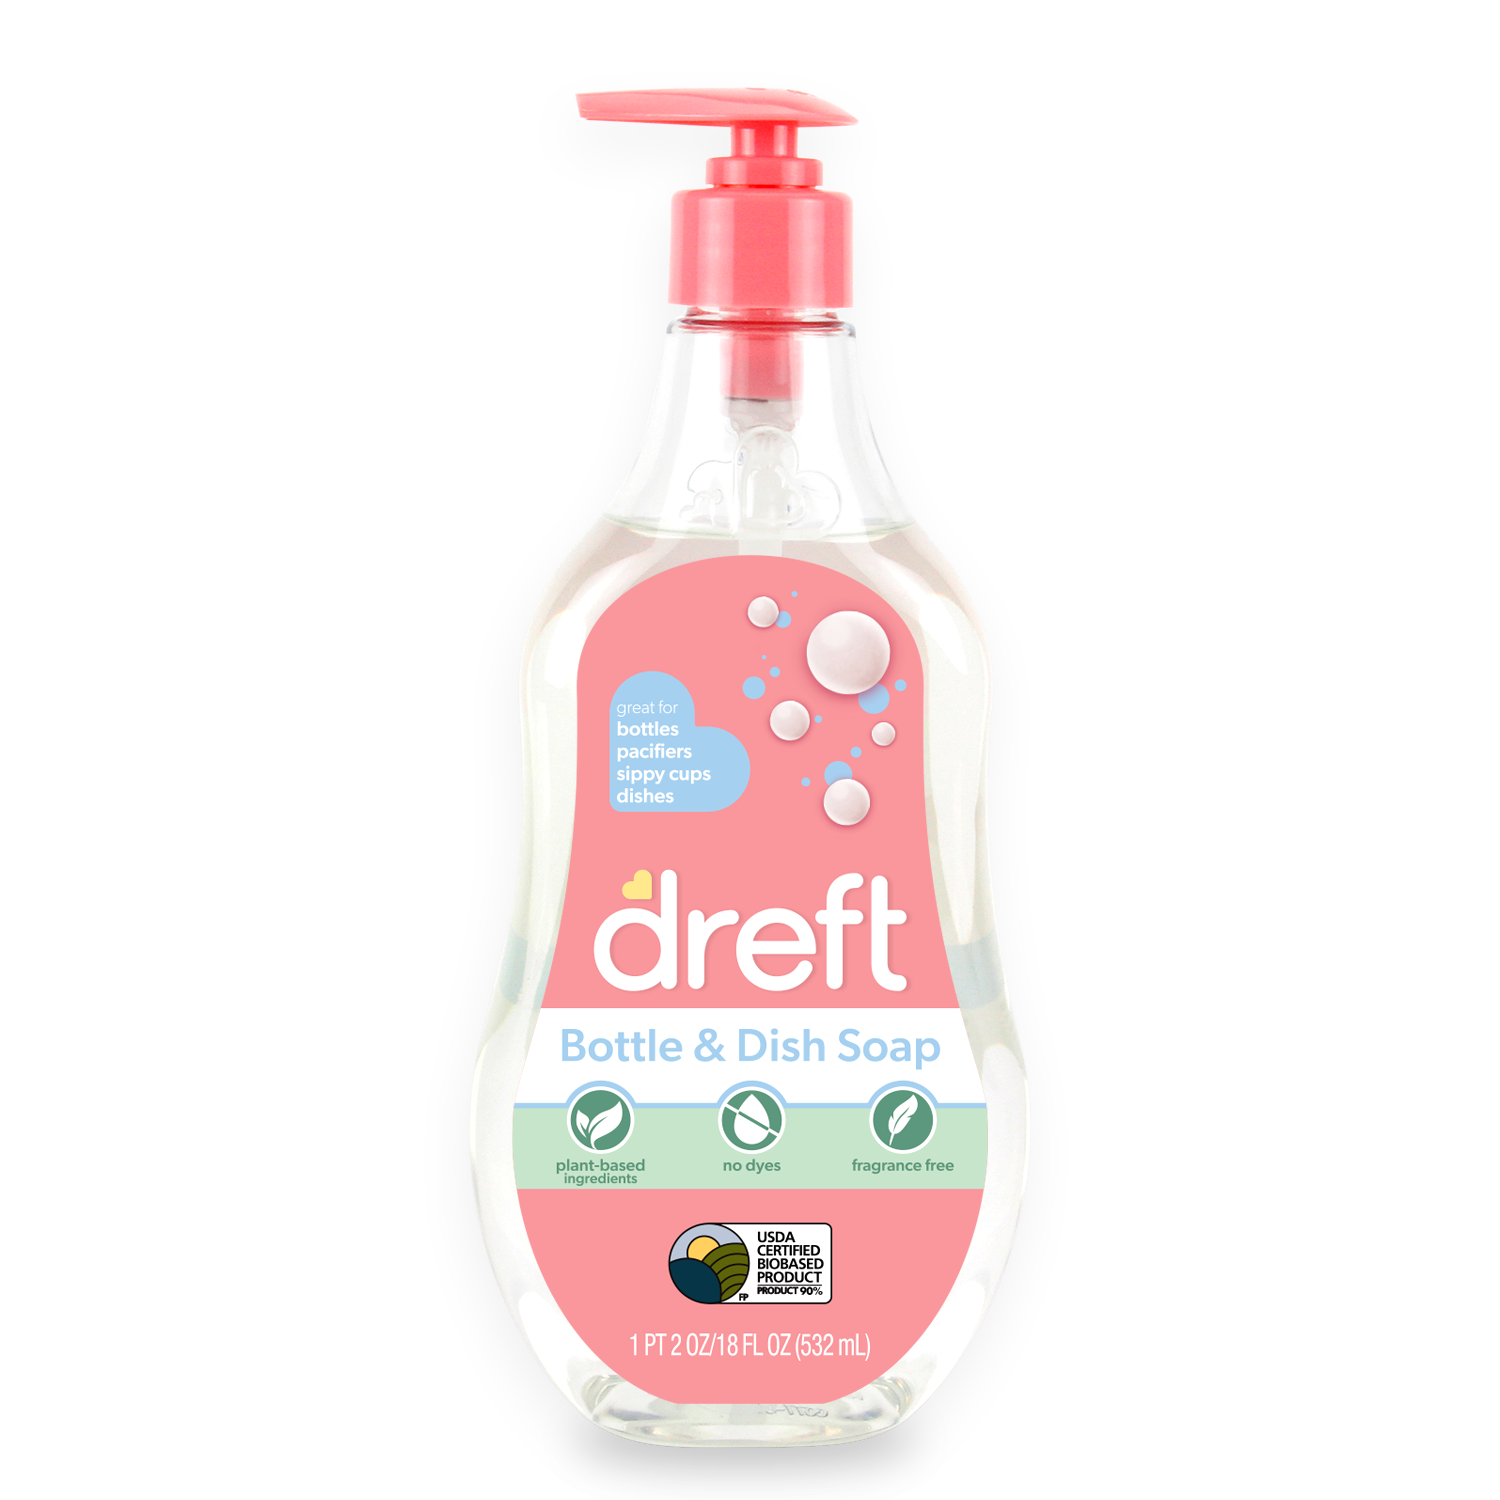  Dreft Laundry Stain Remover, Travel Size, 3 Fluid